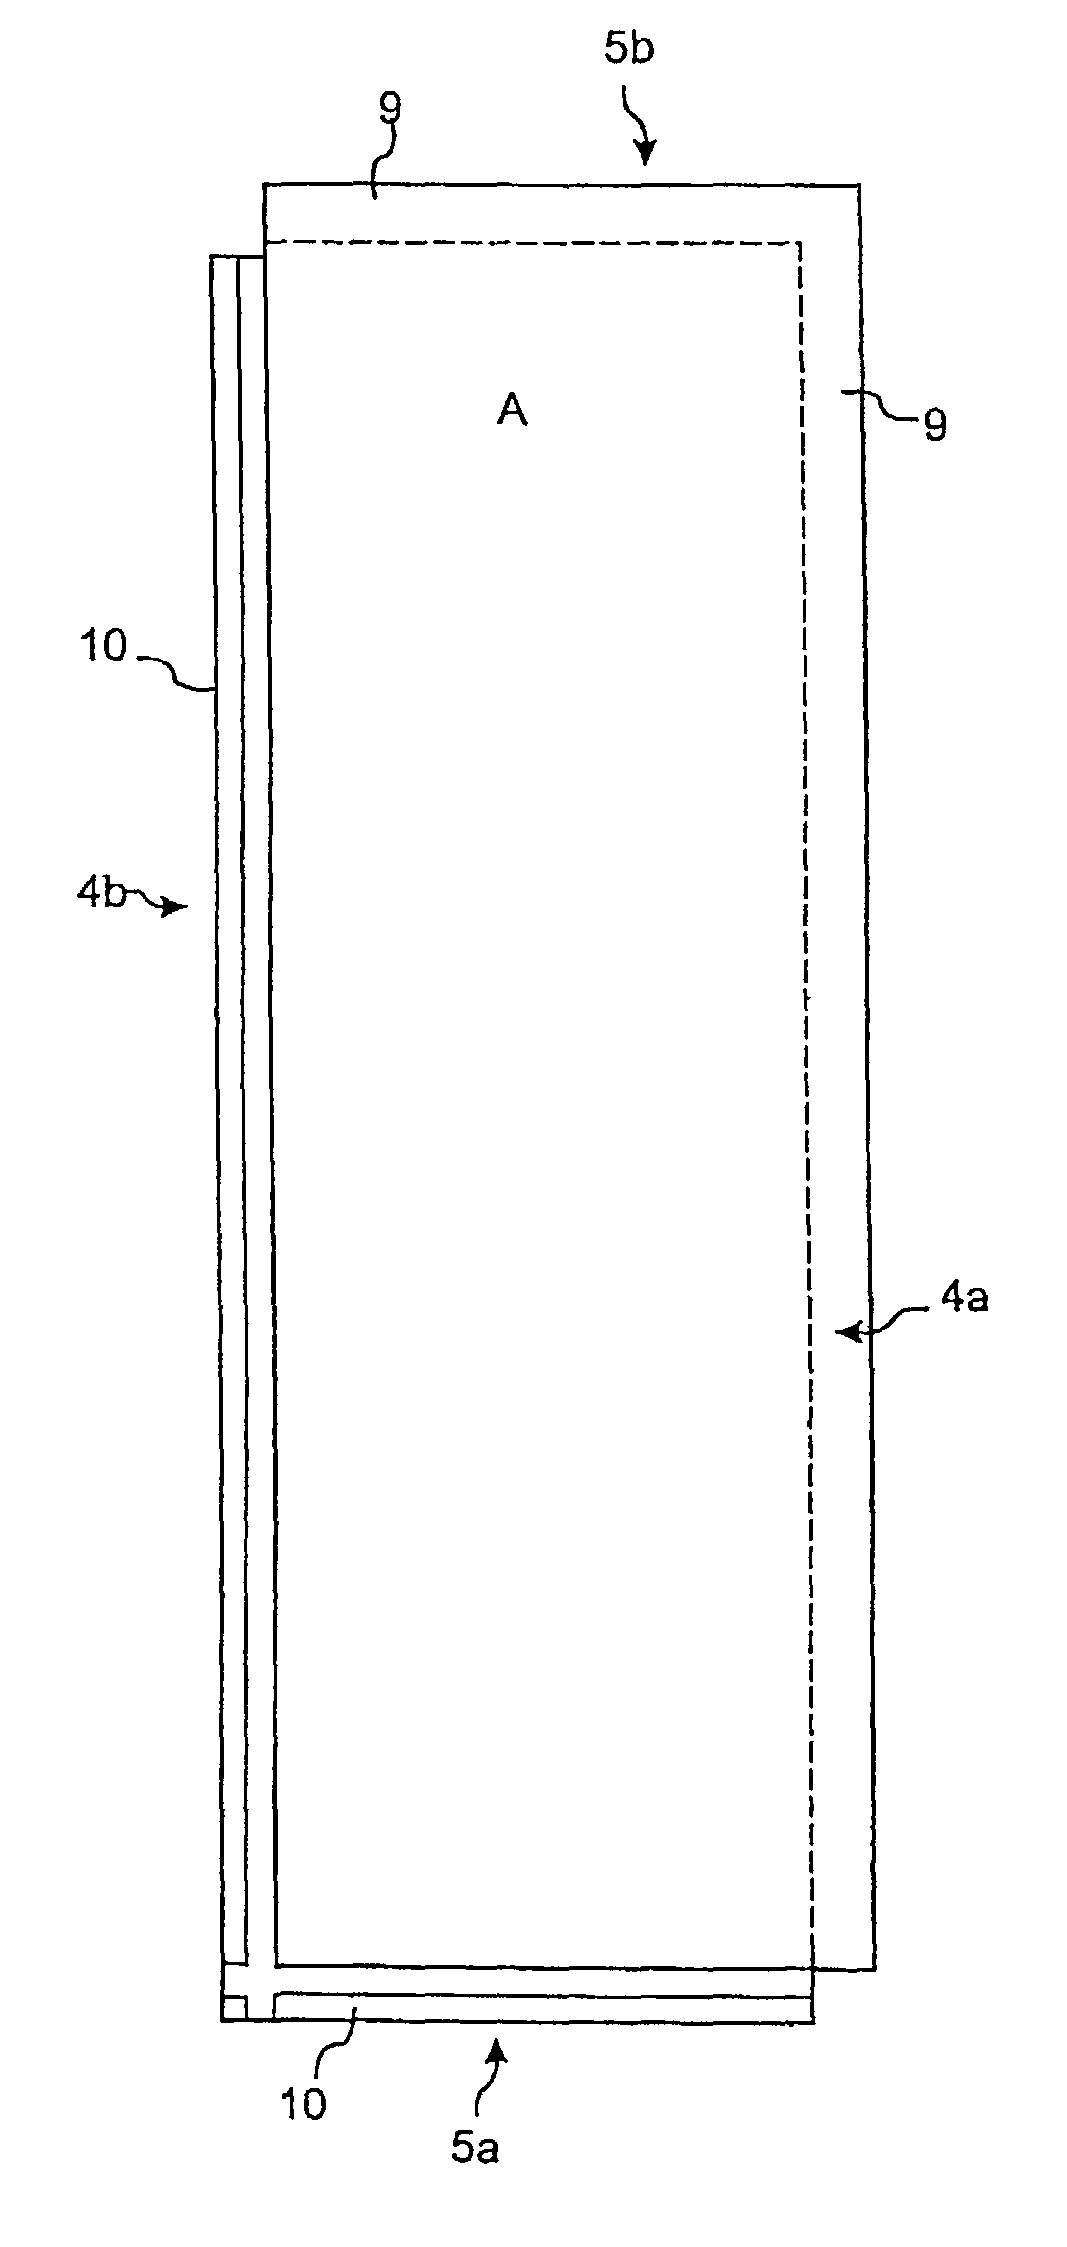 Flooring and method for laying and manufacturing the same